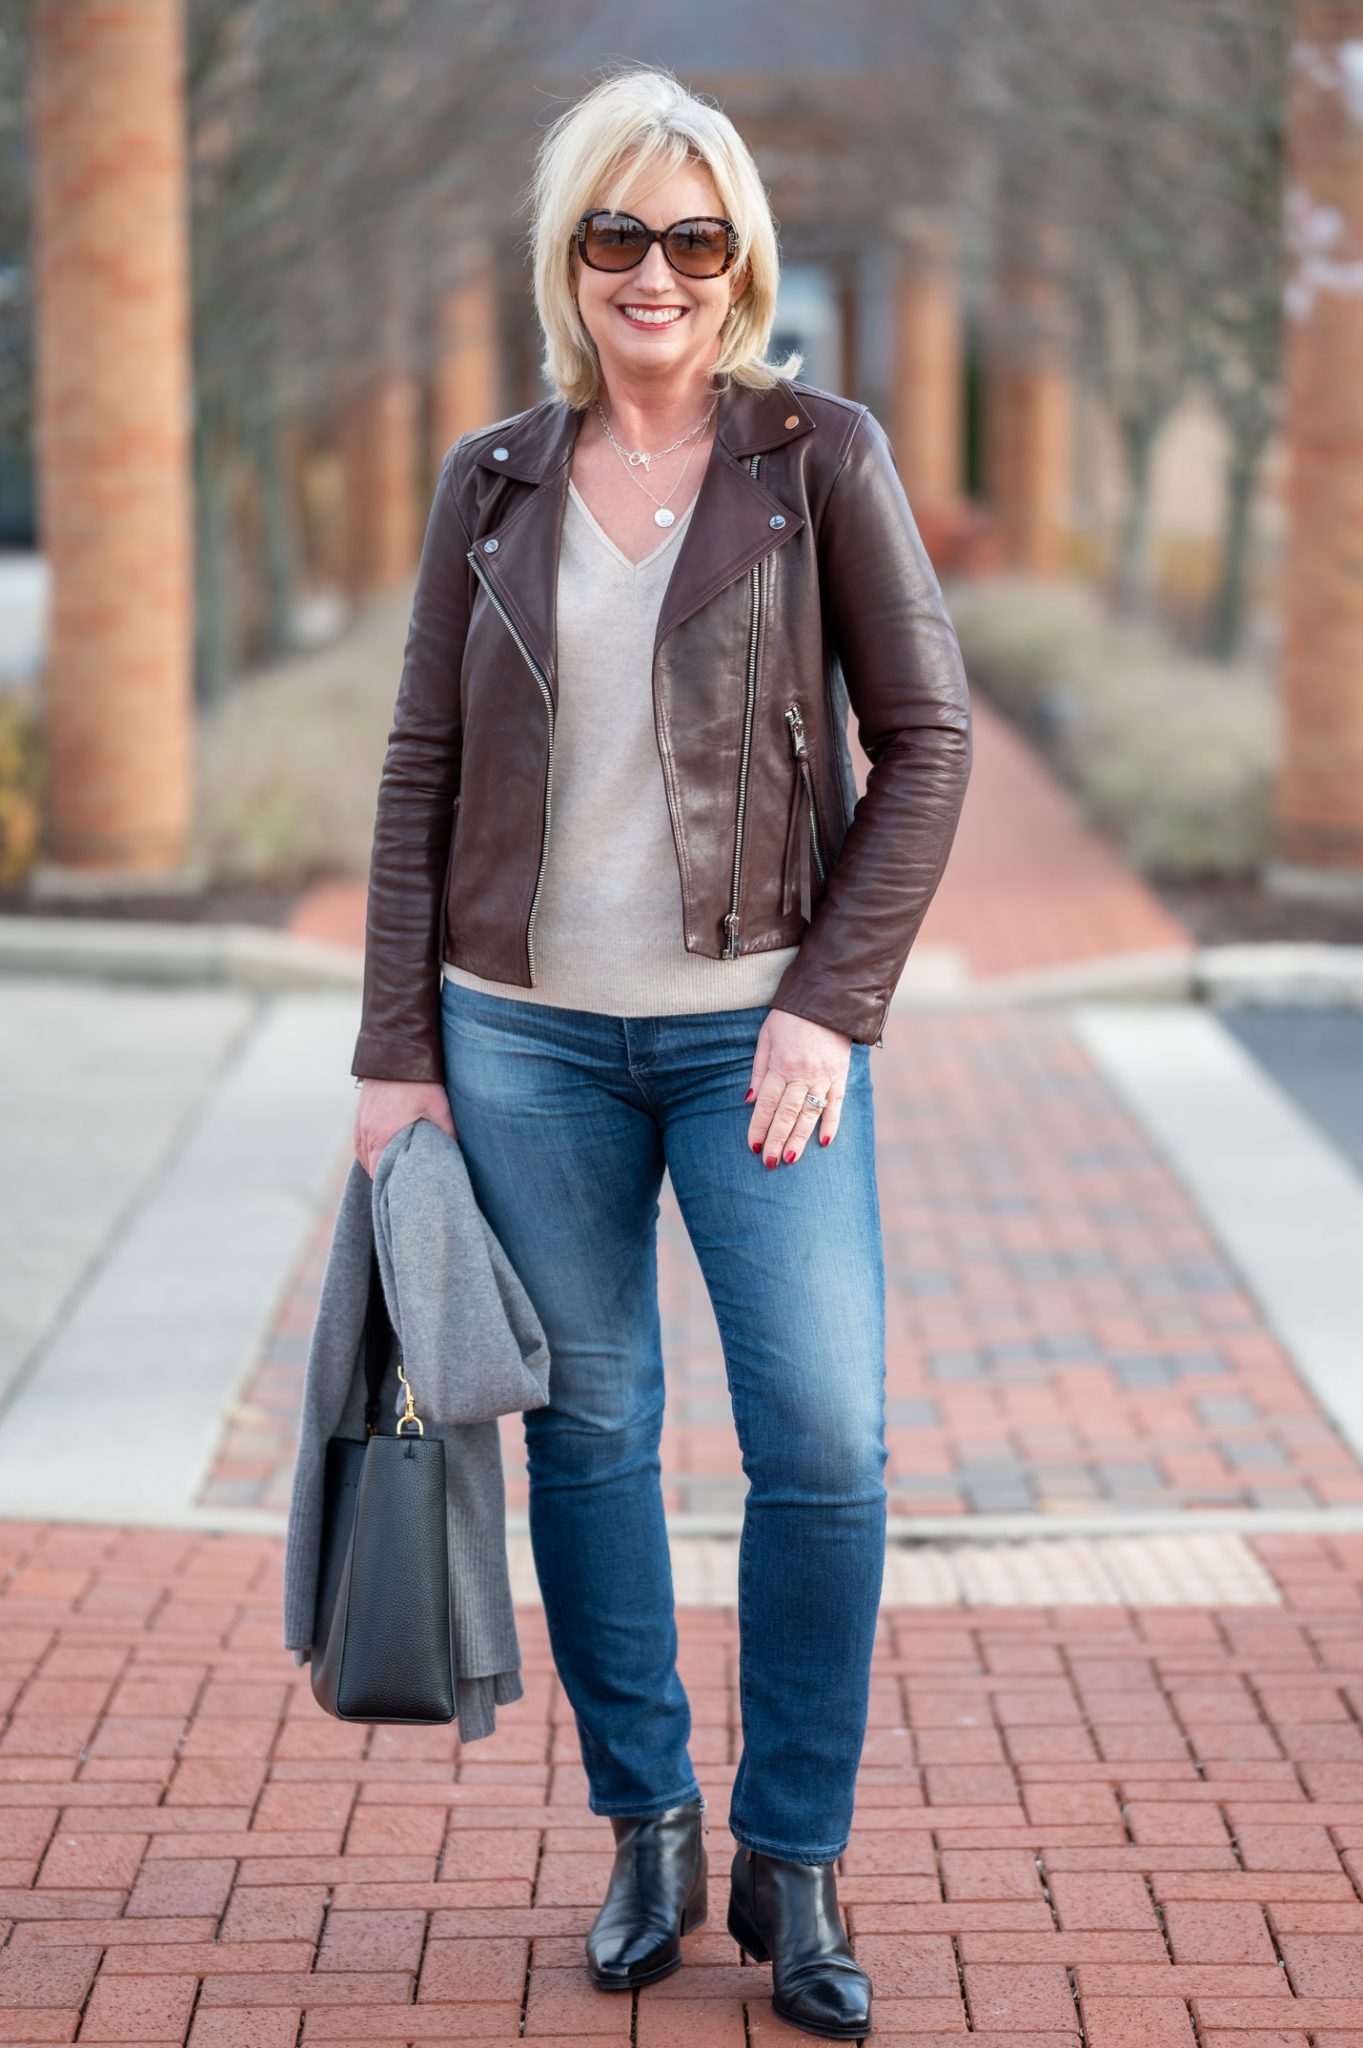 Winter Classics Outfit with a Biker Jacket - Dressed for My Day